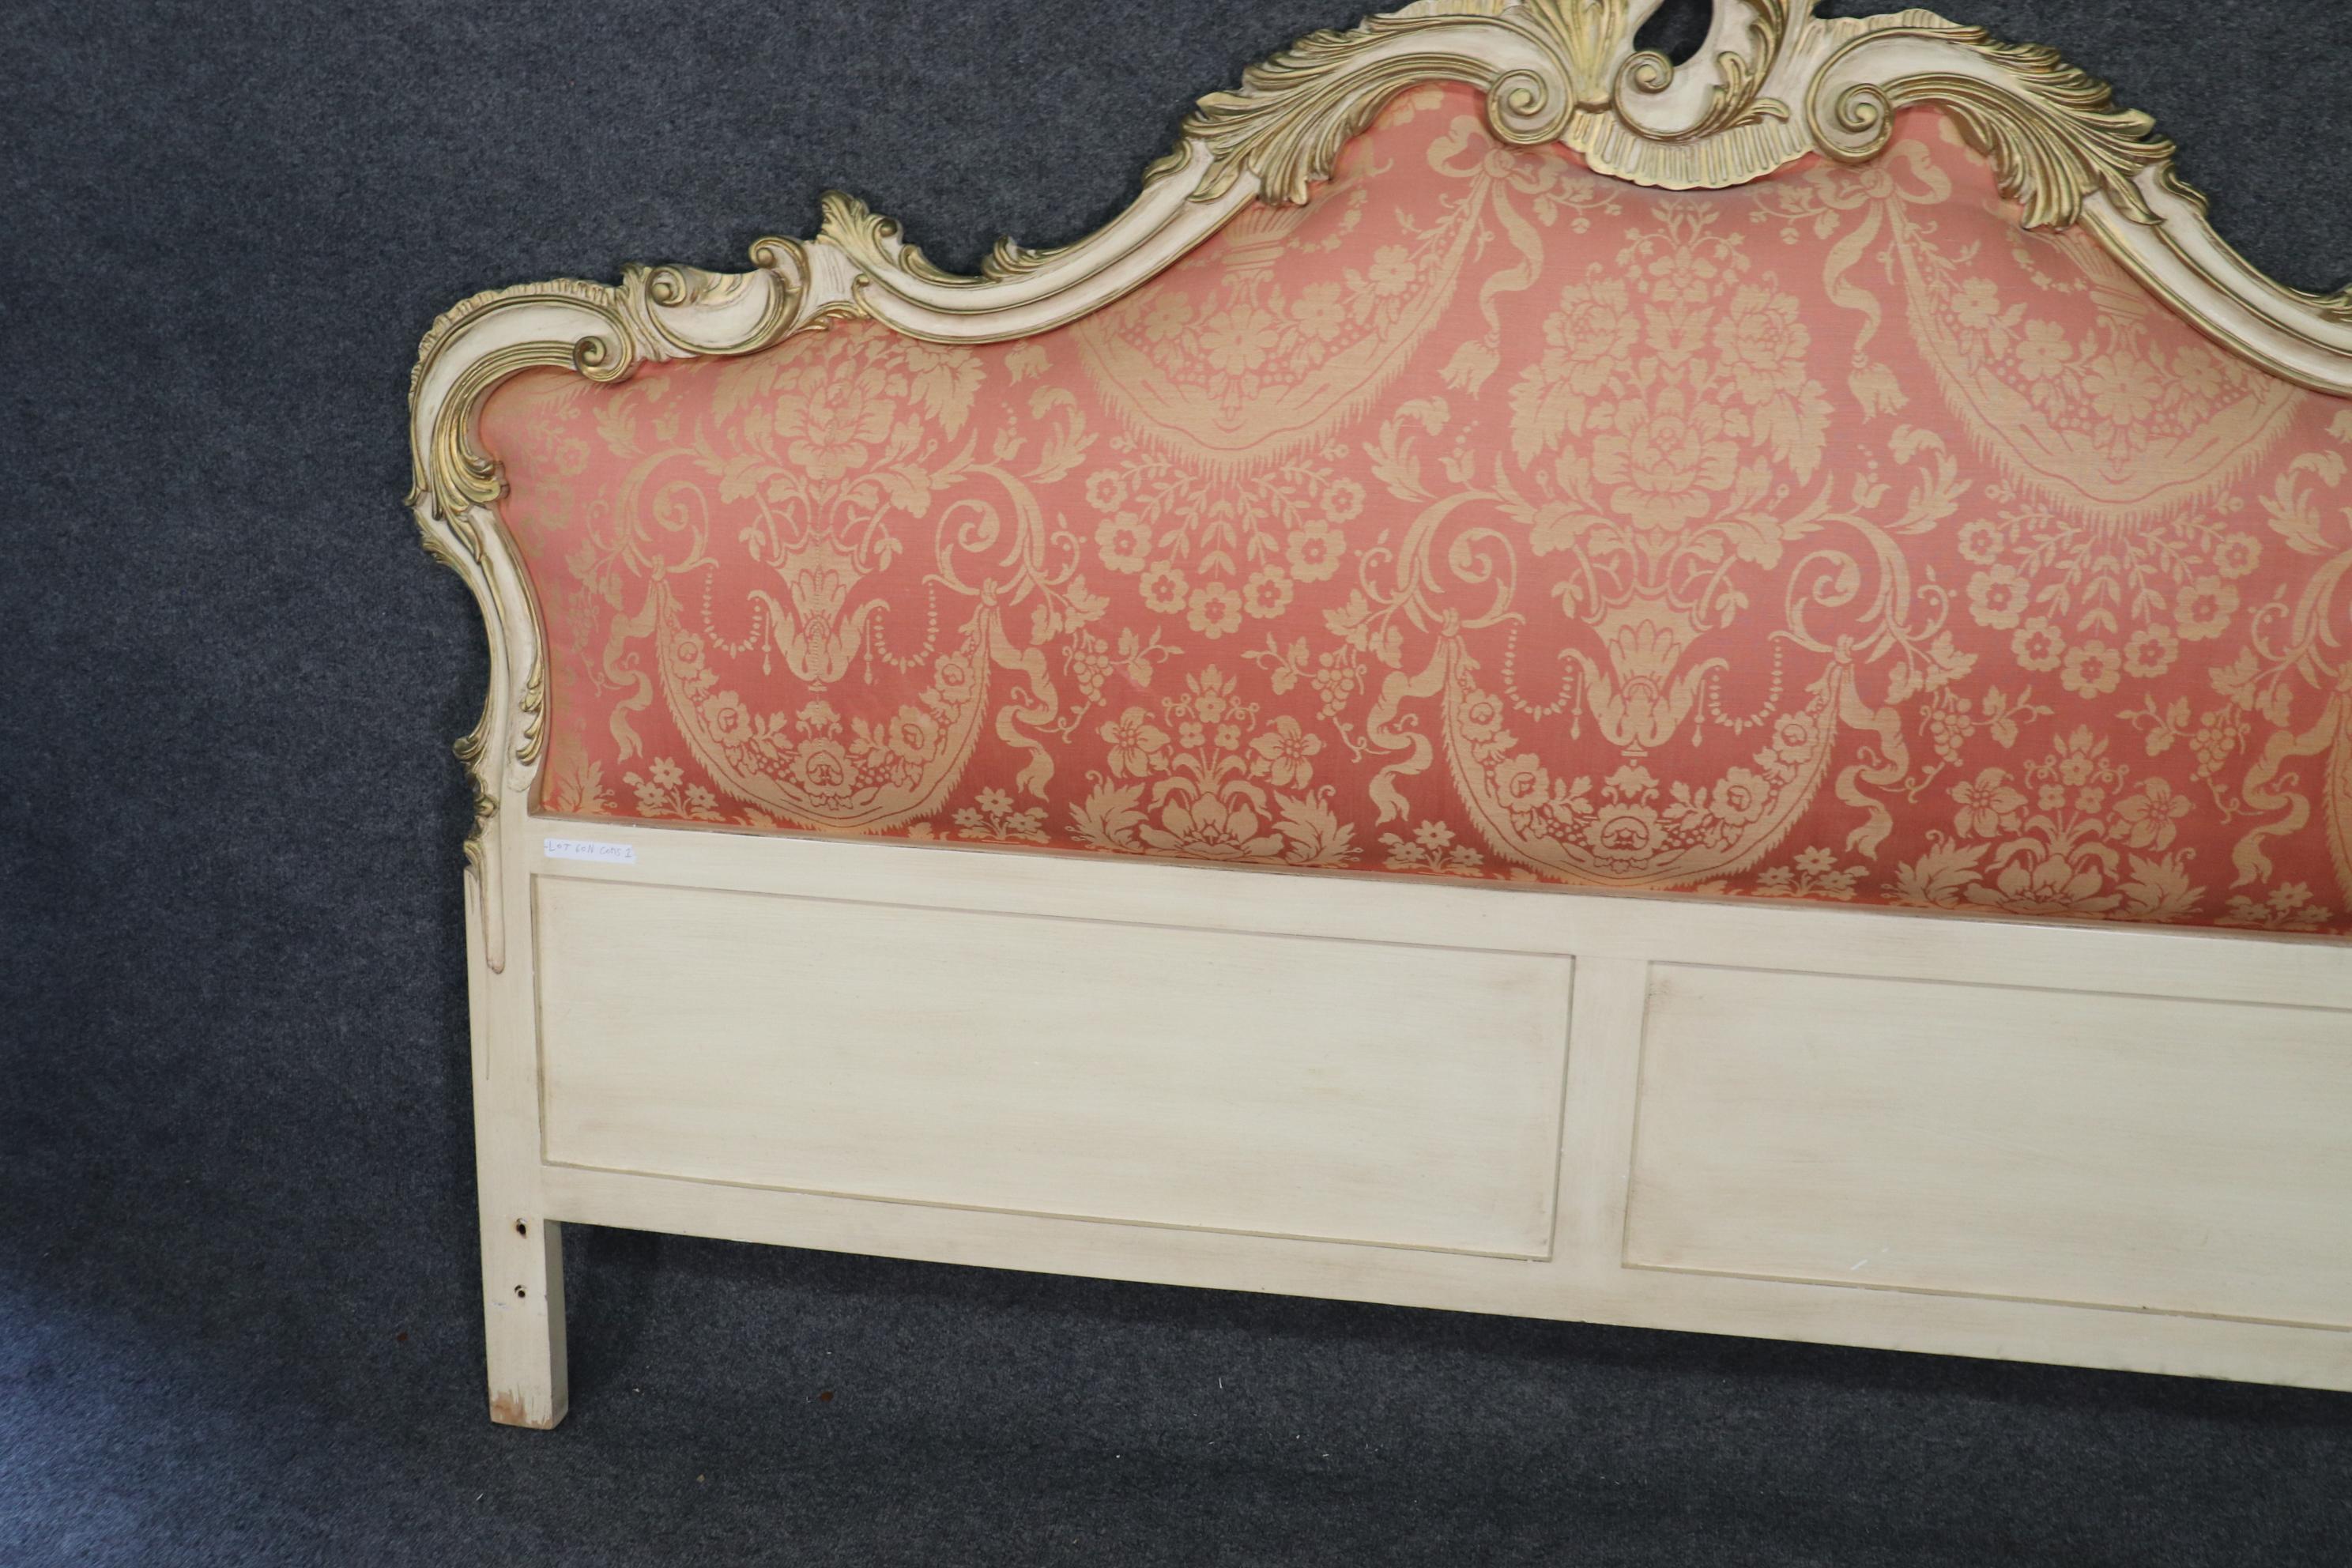 Rococo Revival Carved Painted Upholstered French Louis XV Rococo King Size Headboard